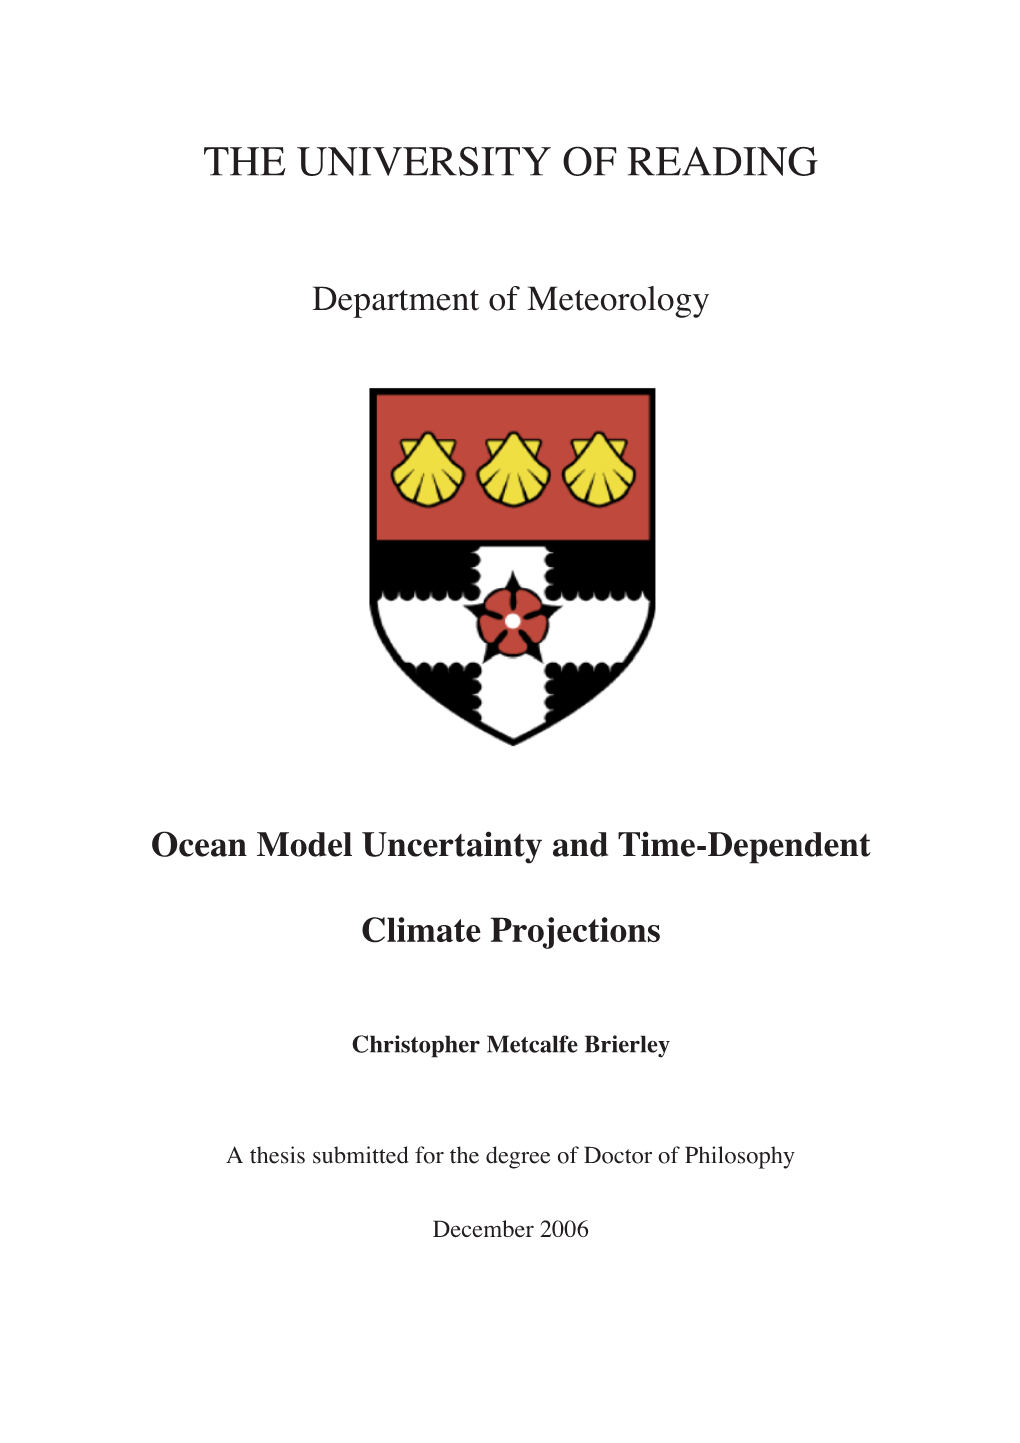 Ocean Model Uncertainty and Time-Dependent Climate Projections